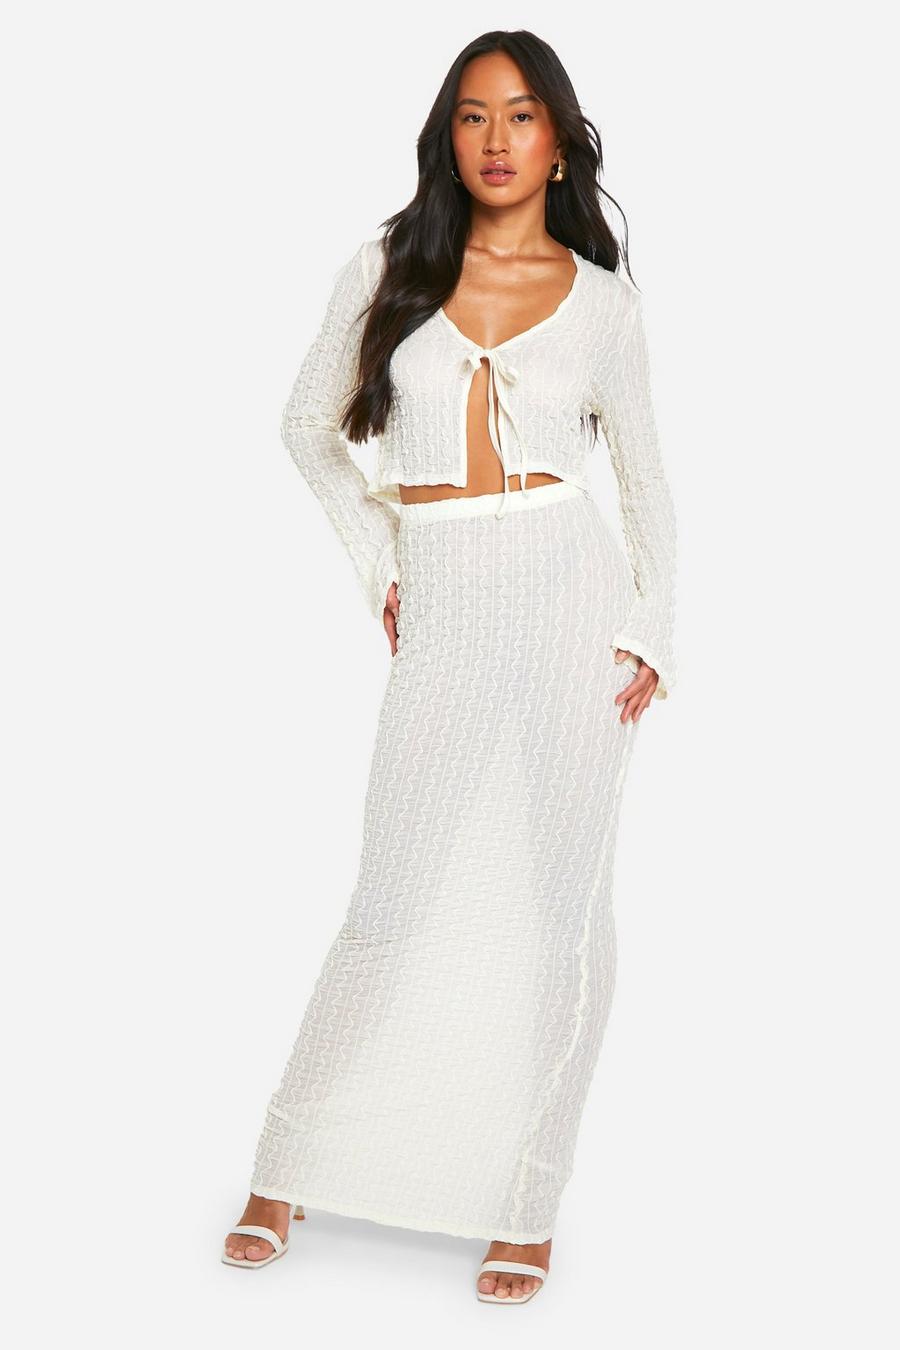 Ivory Sheer Textured Low Rise Maxi Skirt